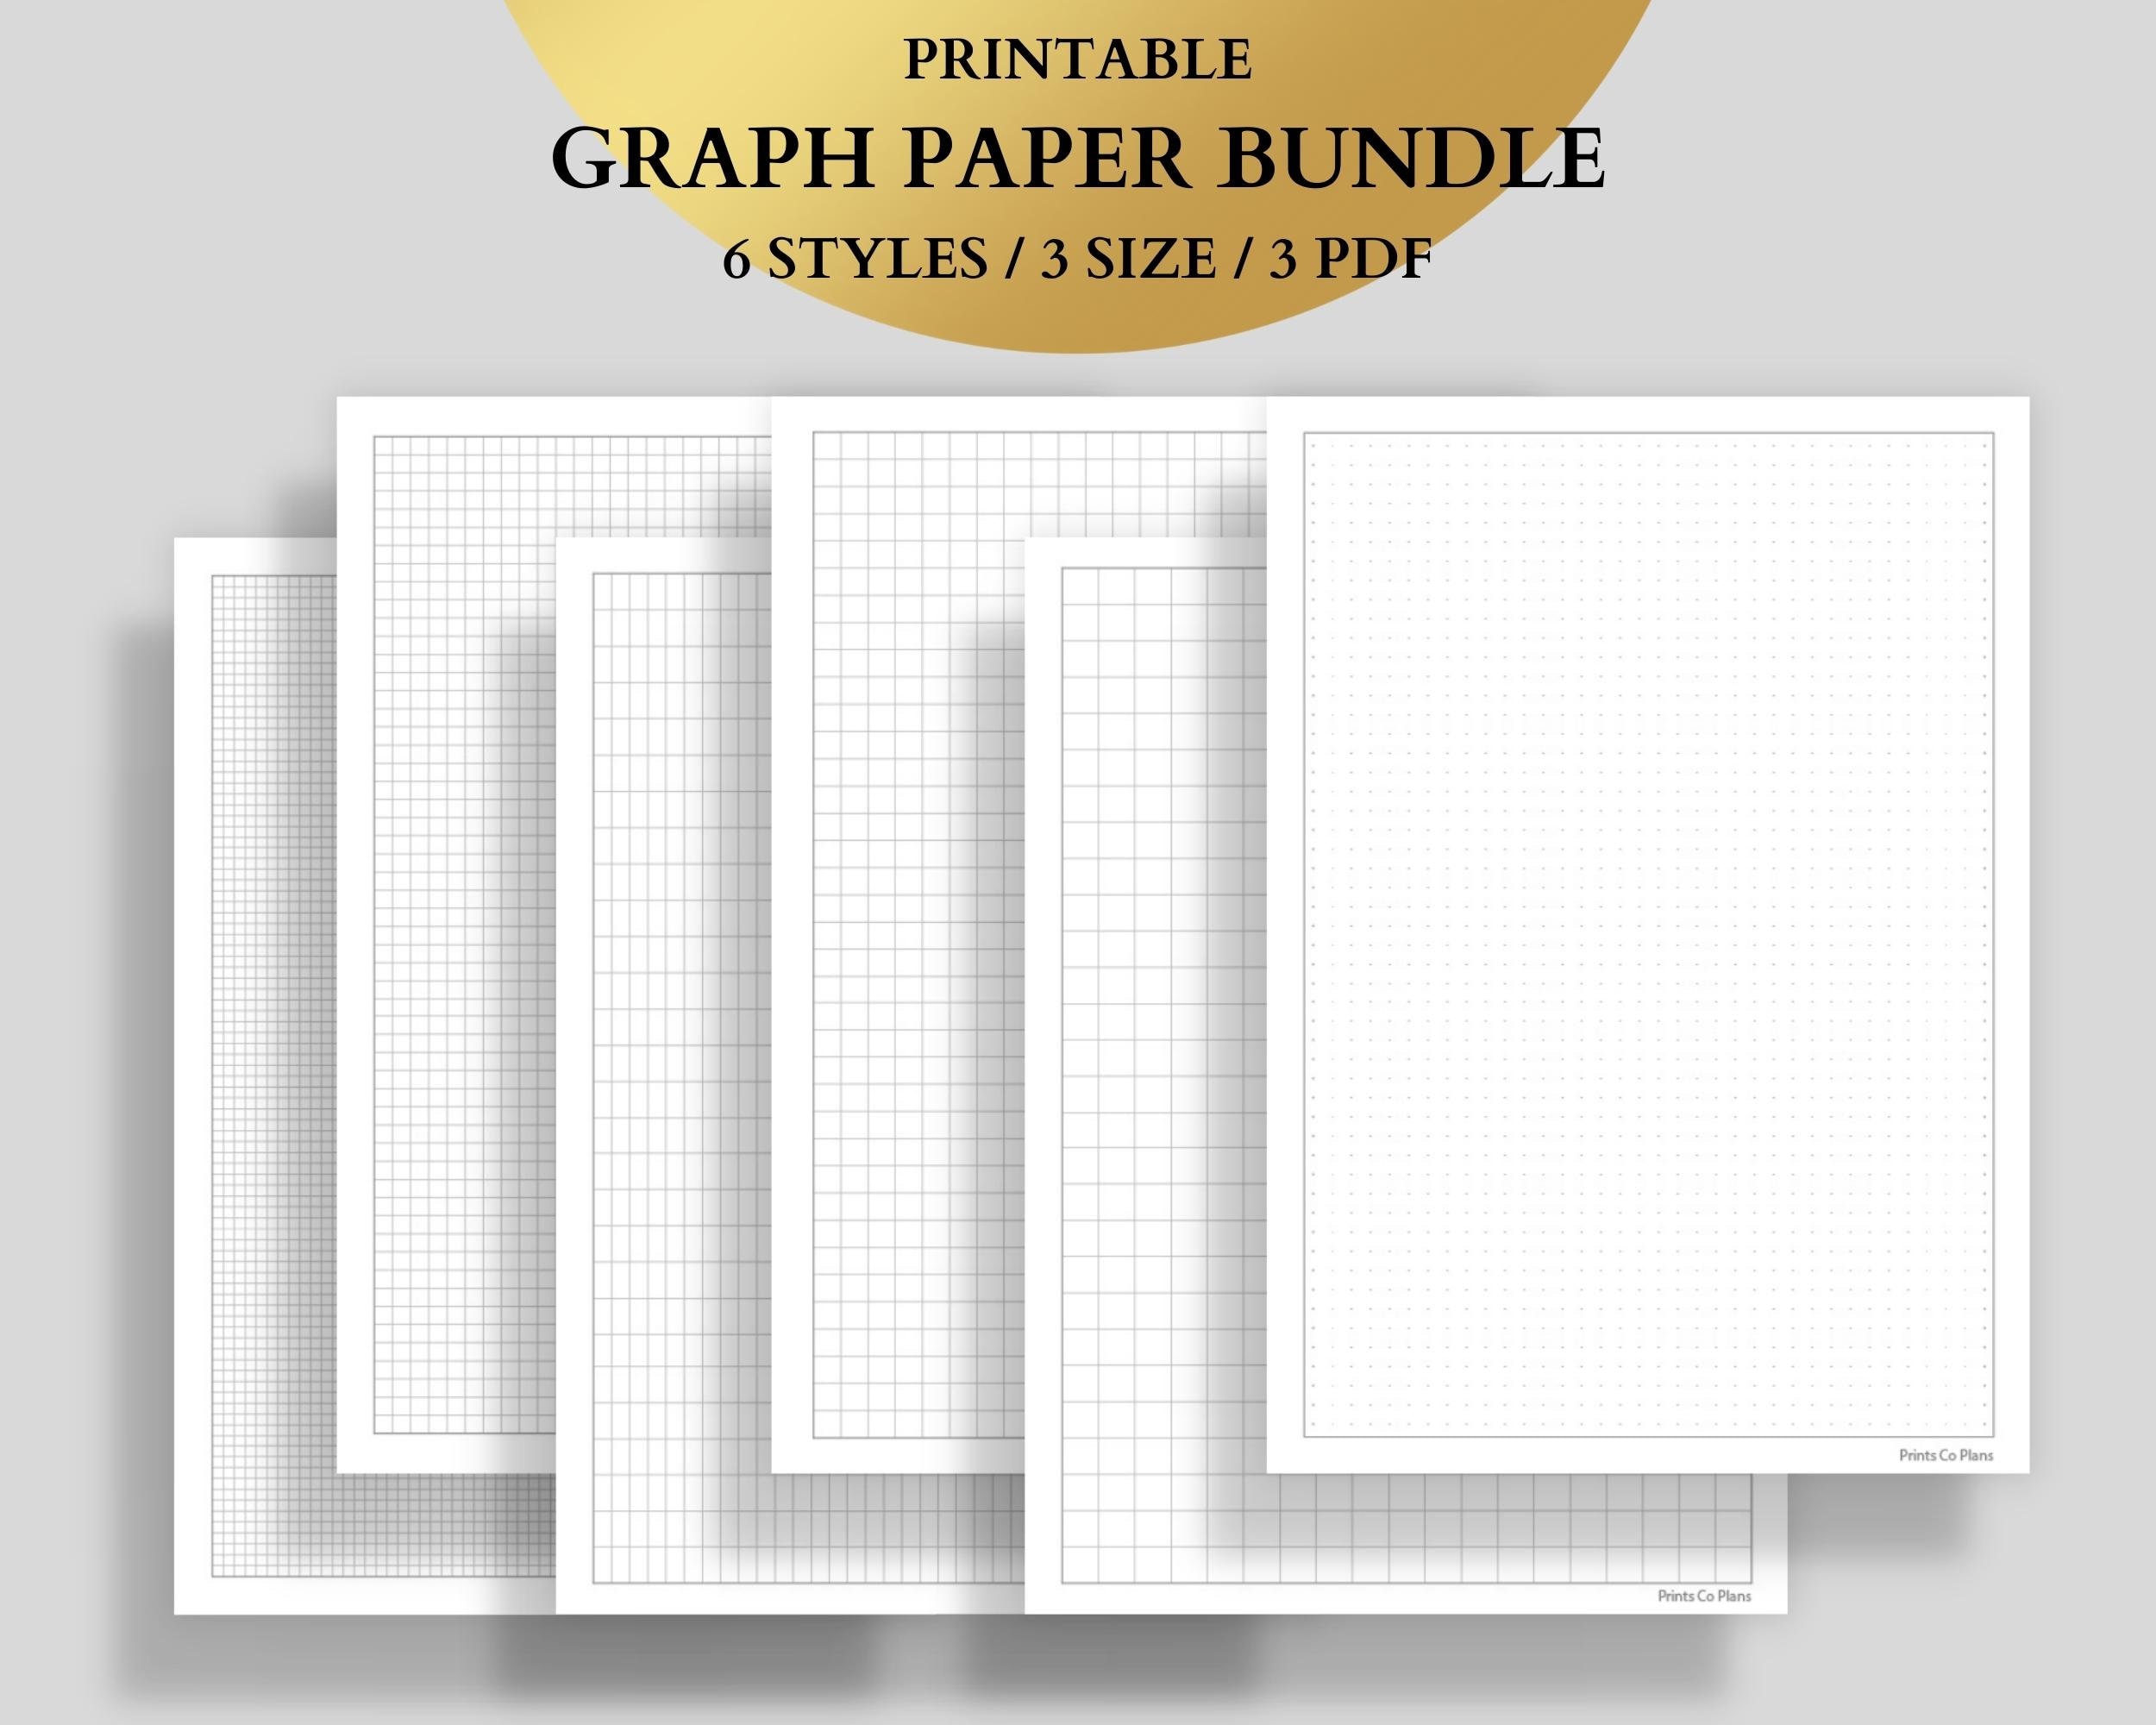 Better Office Products Graph Paper Pad, 17 inch x 11 inch, 50 Sheets, Blue Line Border, Blueprint Paper, Double Sided, White, 4x4 Blue Quad Rule, Easy